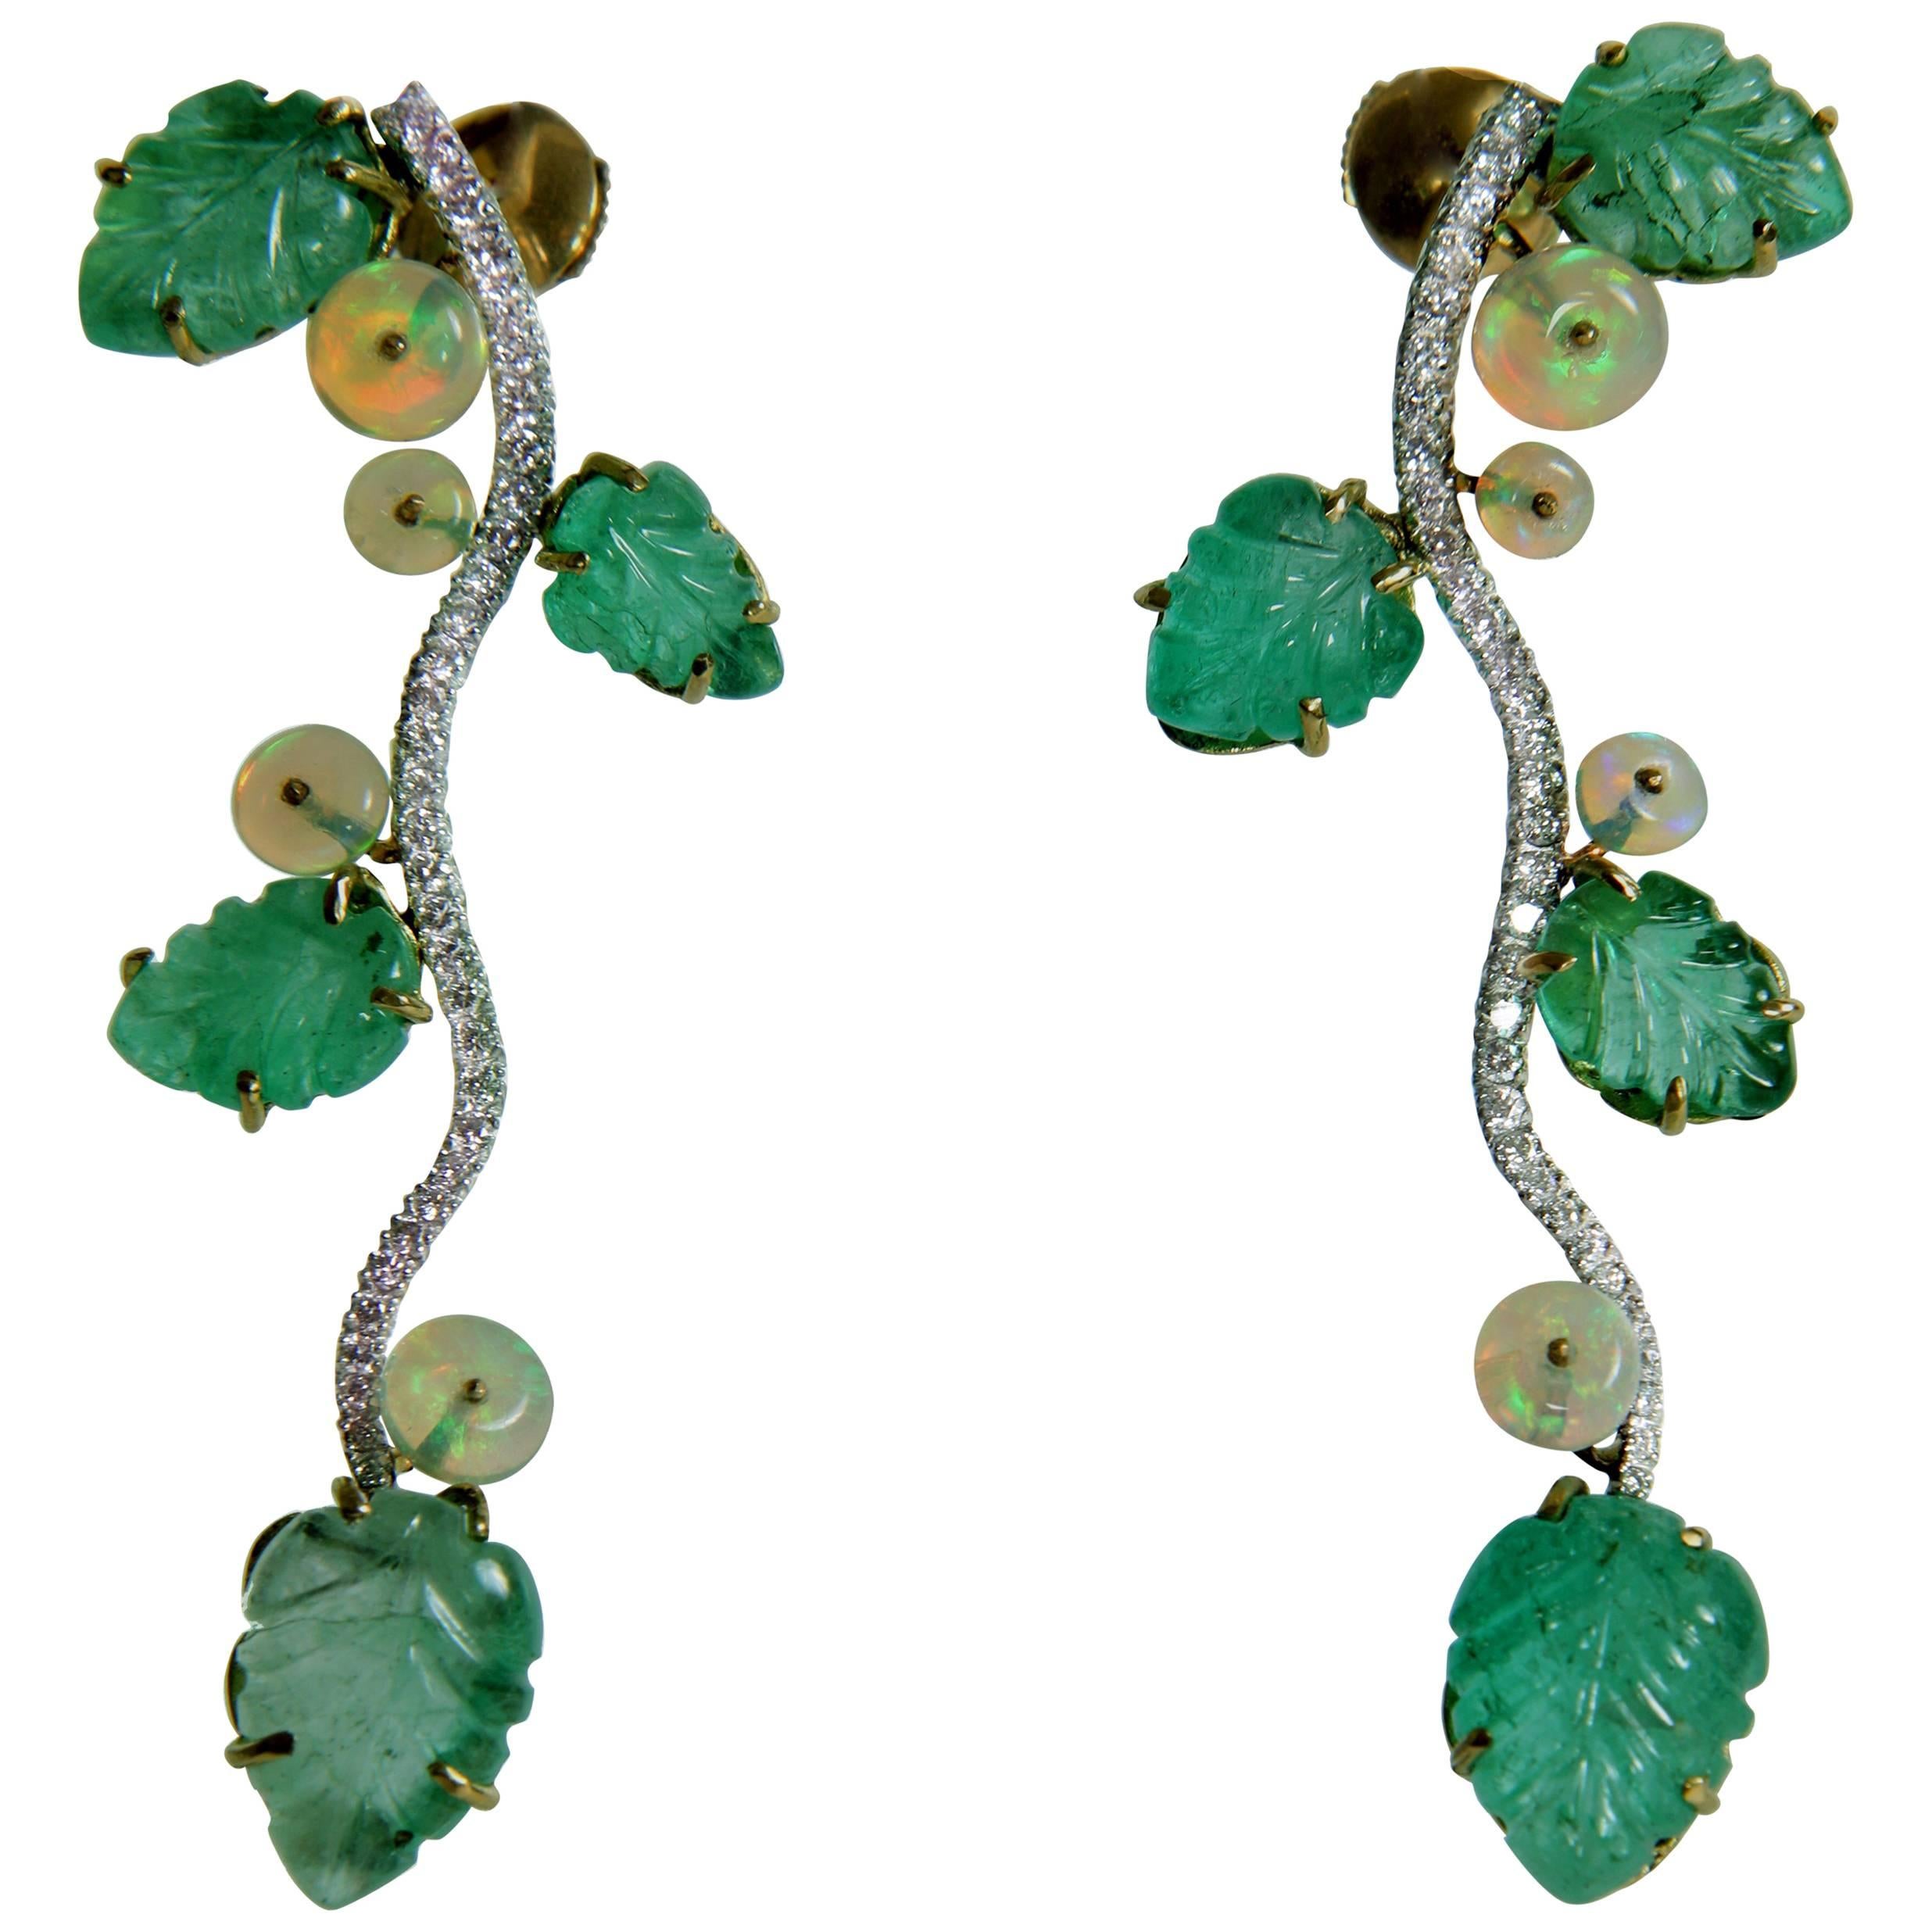 Engraved Emerald Leaves, Opals Beads and Diamonds Earrings by Marion Jeantet For Sale